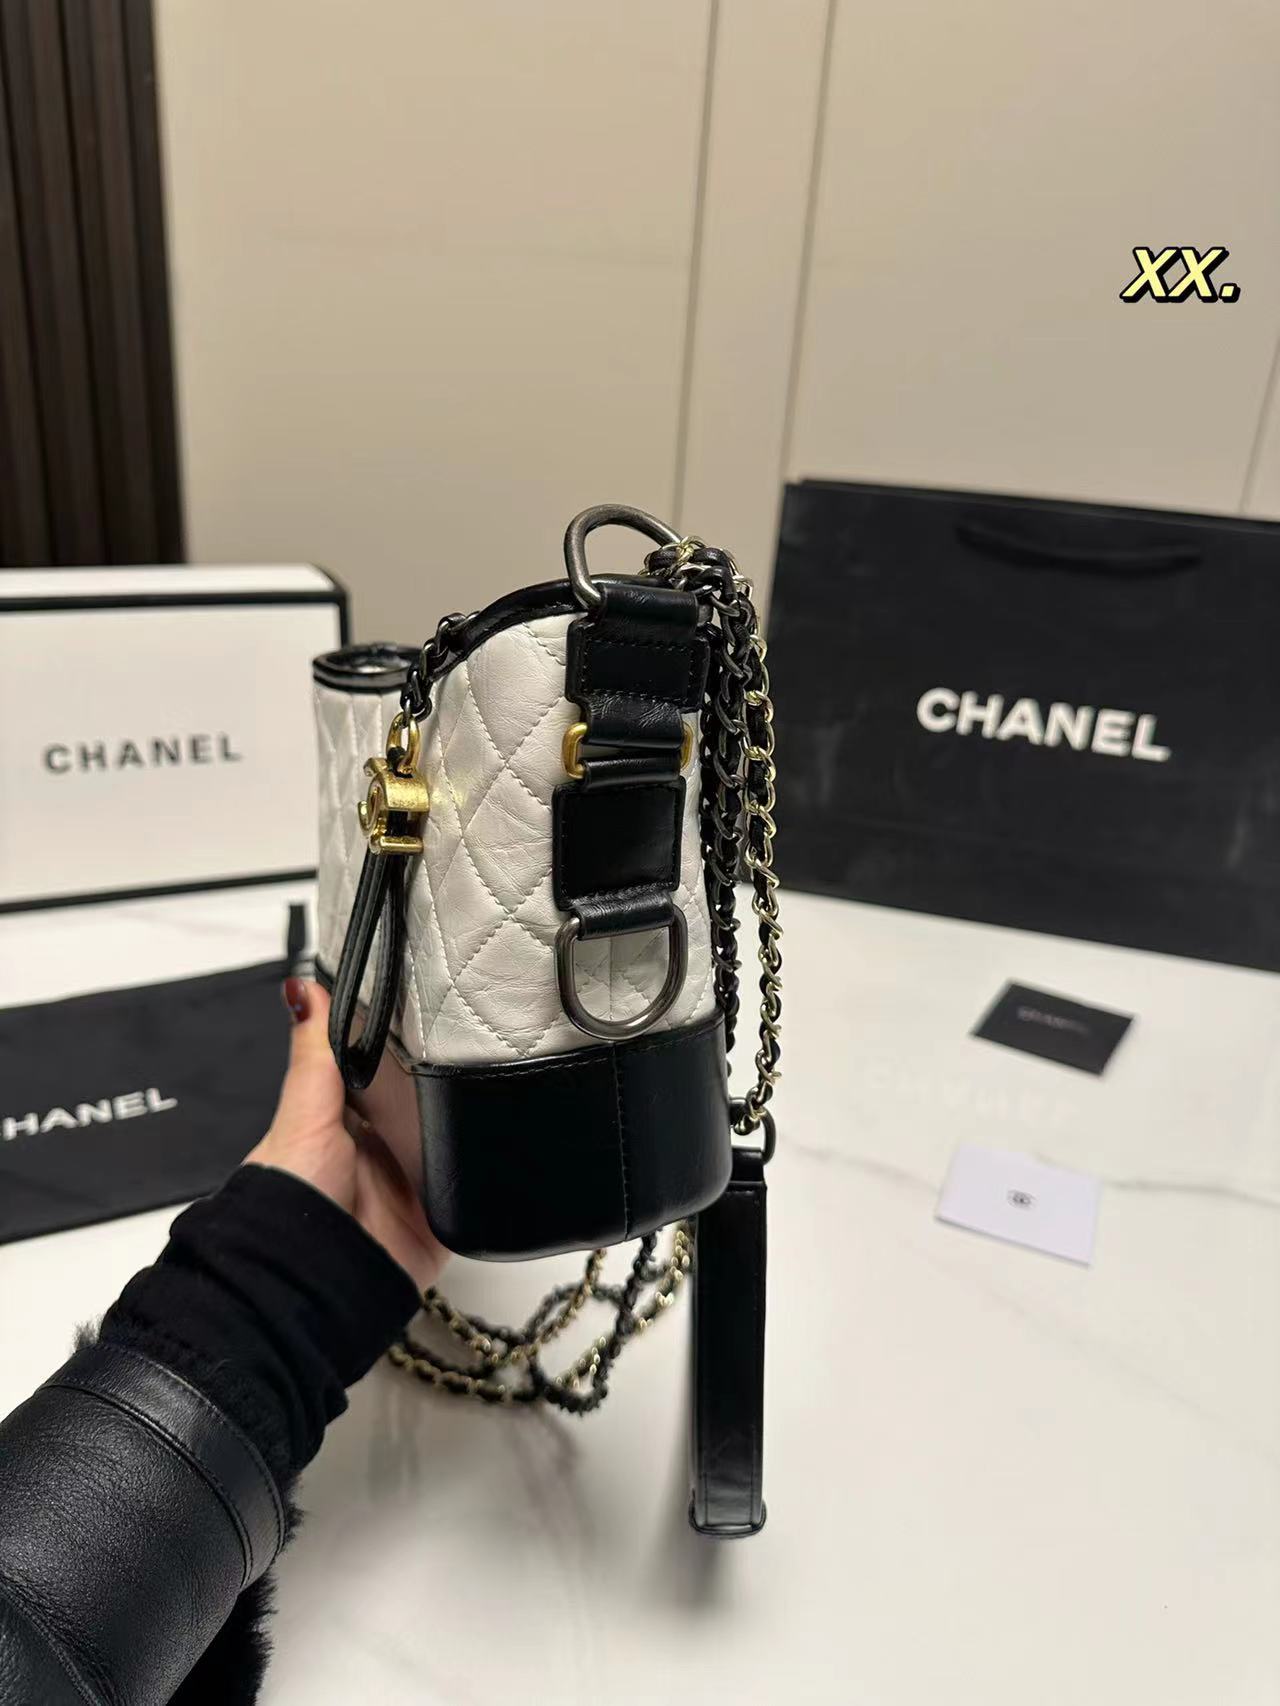 Best Replicas Bags - Chanel Chanel's Gabrielle Small Hobo Bag A91810 Top Quality Louis Vuitton LV Replica Bags On Sales